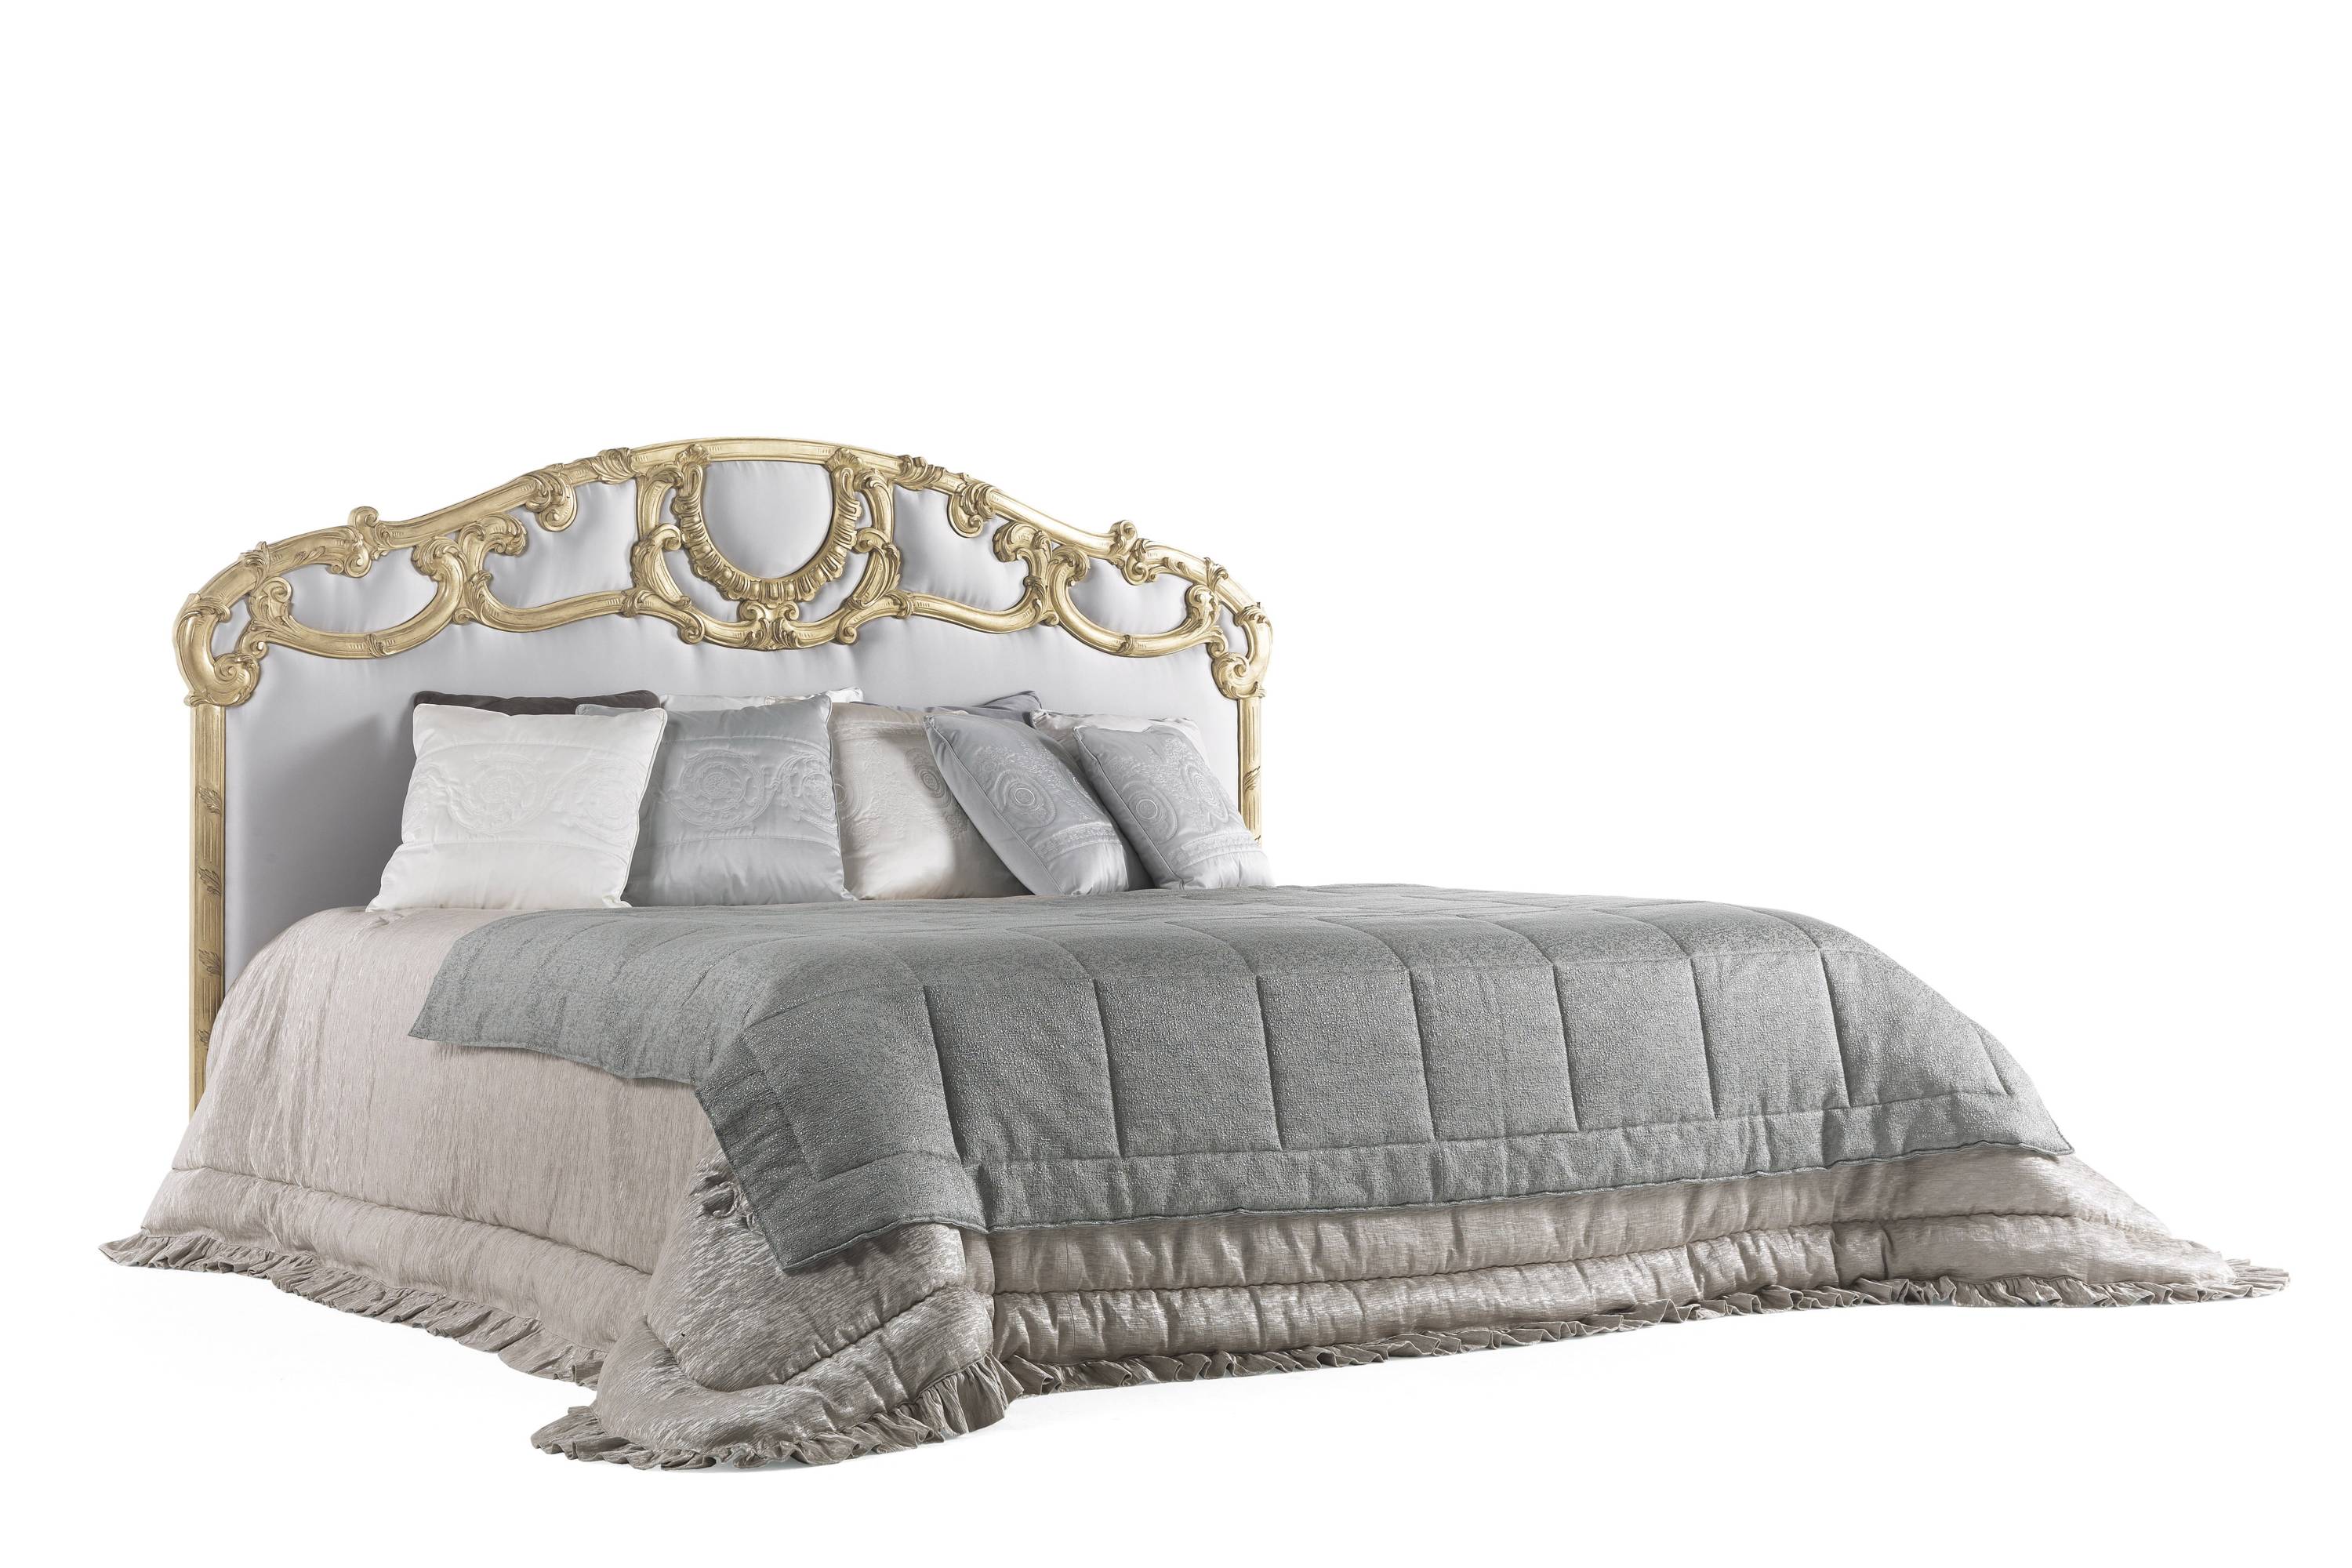 MADELEINE bed – Transform your space with sophisticated Made in Italy classic BEDS.